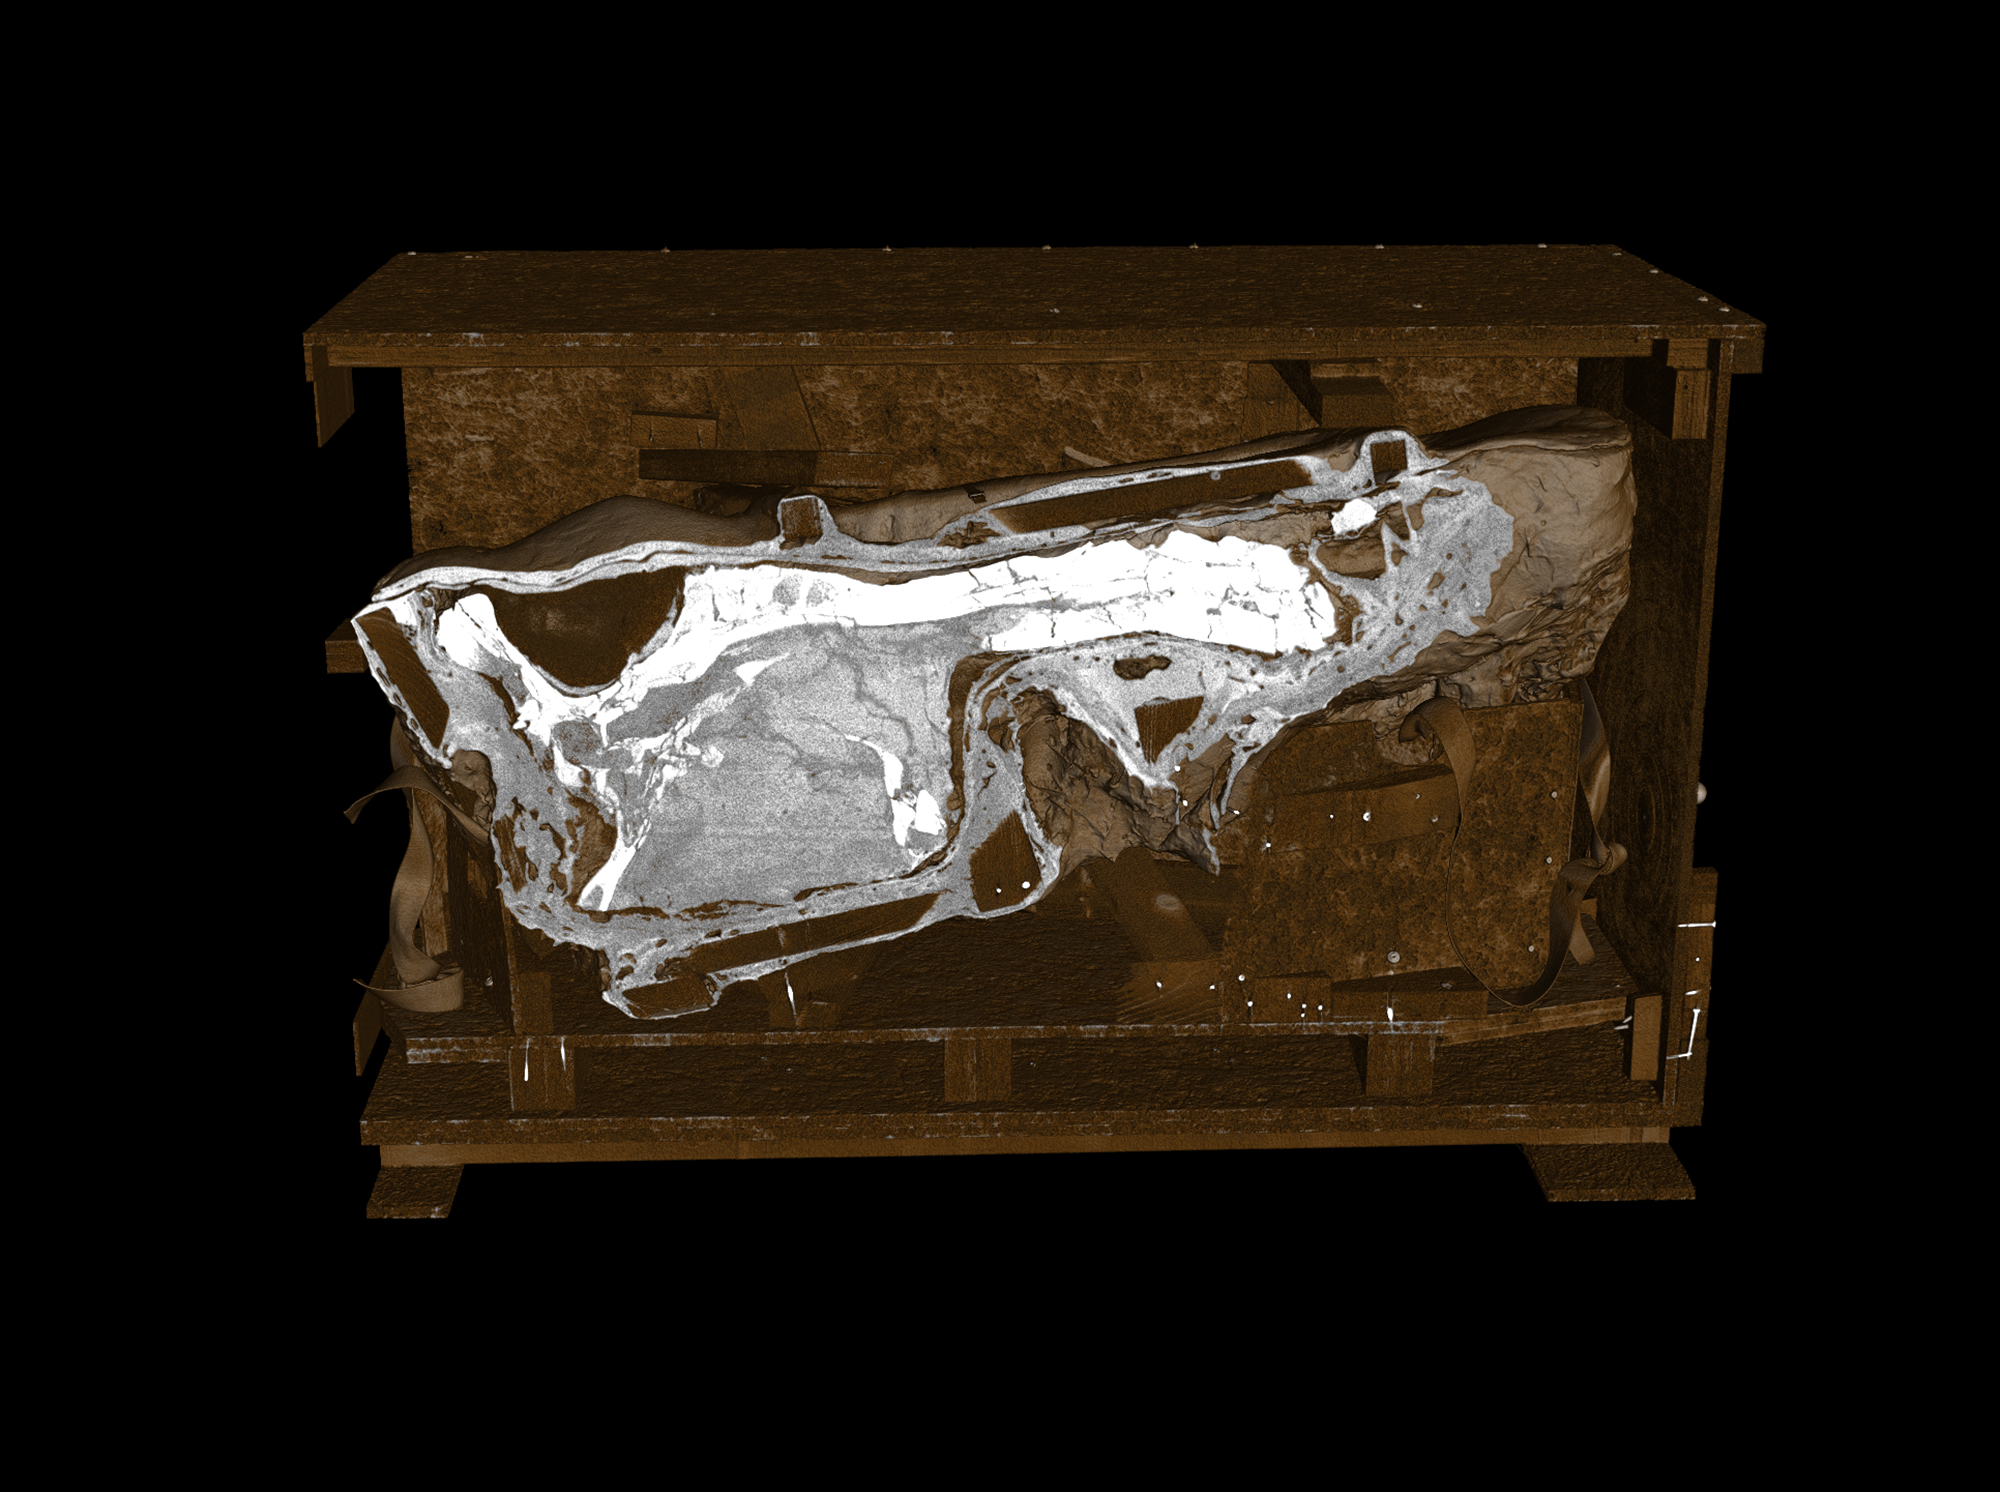 The images are computer tomography scans of a major Tyrannosaurus rex skull taken at the Fraunhofer Development Center for X-Ray Technology EZRT utilizing the biggest CT scanner worldwide. The images show different color filters and perspectives. © Naturalis Biodiversity Center/Fraunhofer IIS